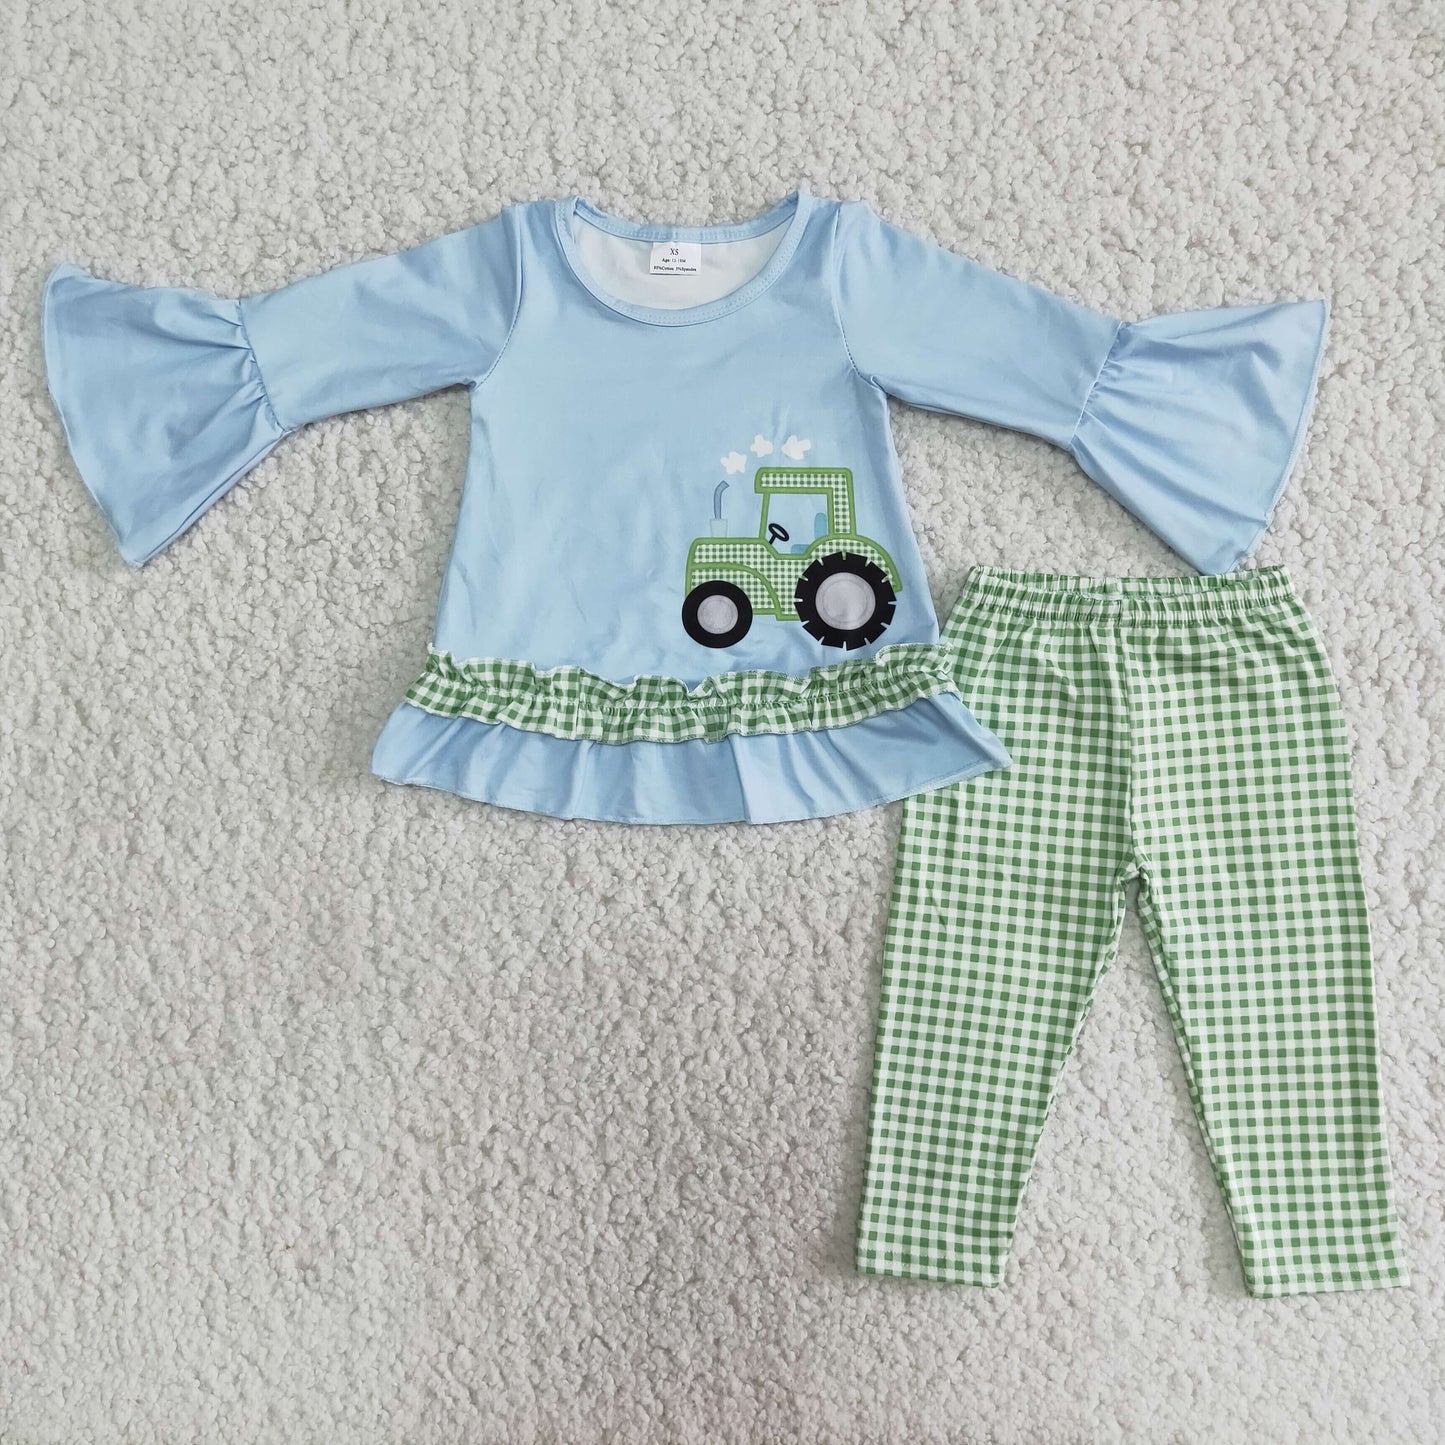 Truck Tunic Top Green Plaid Leggings Outfit